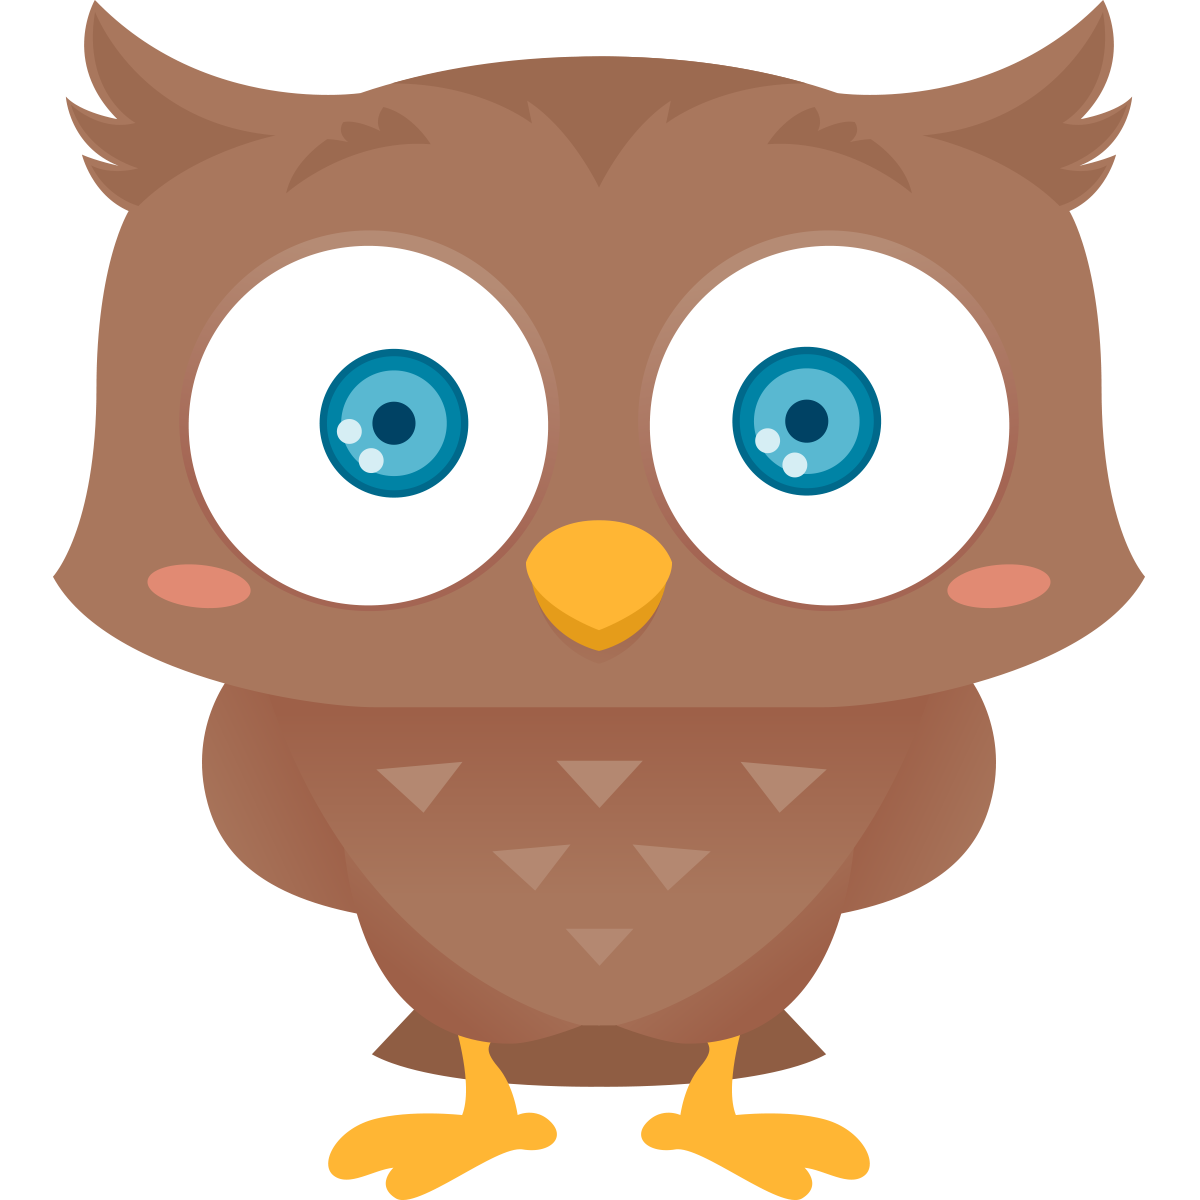 Clip art of owl free cartoon clipart by